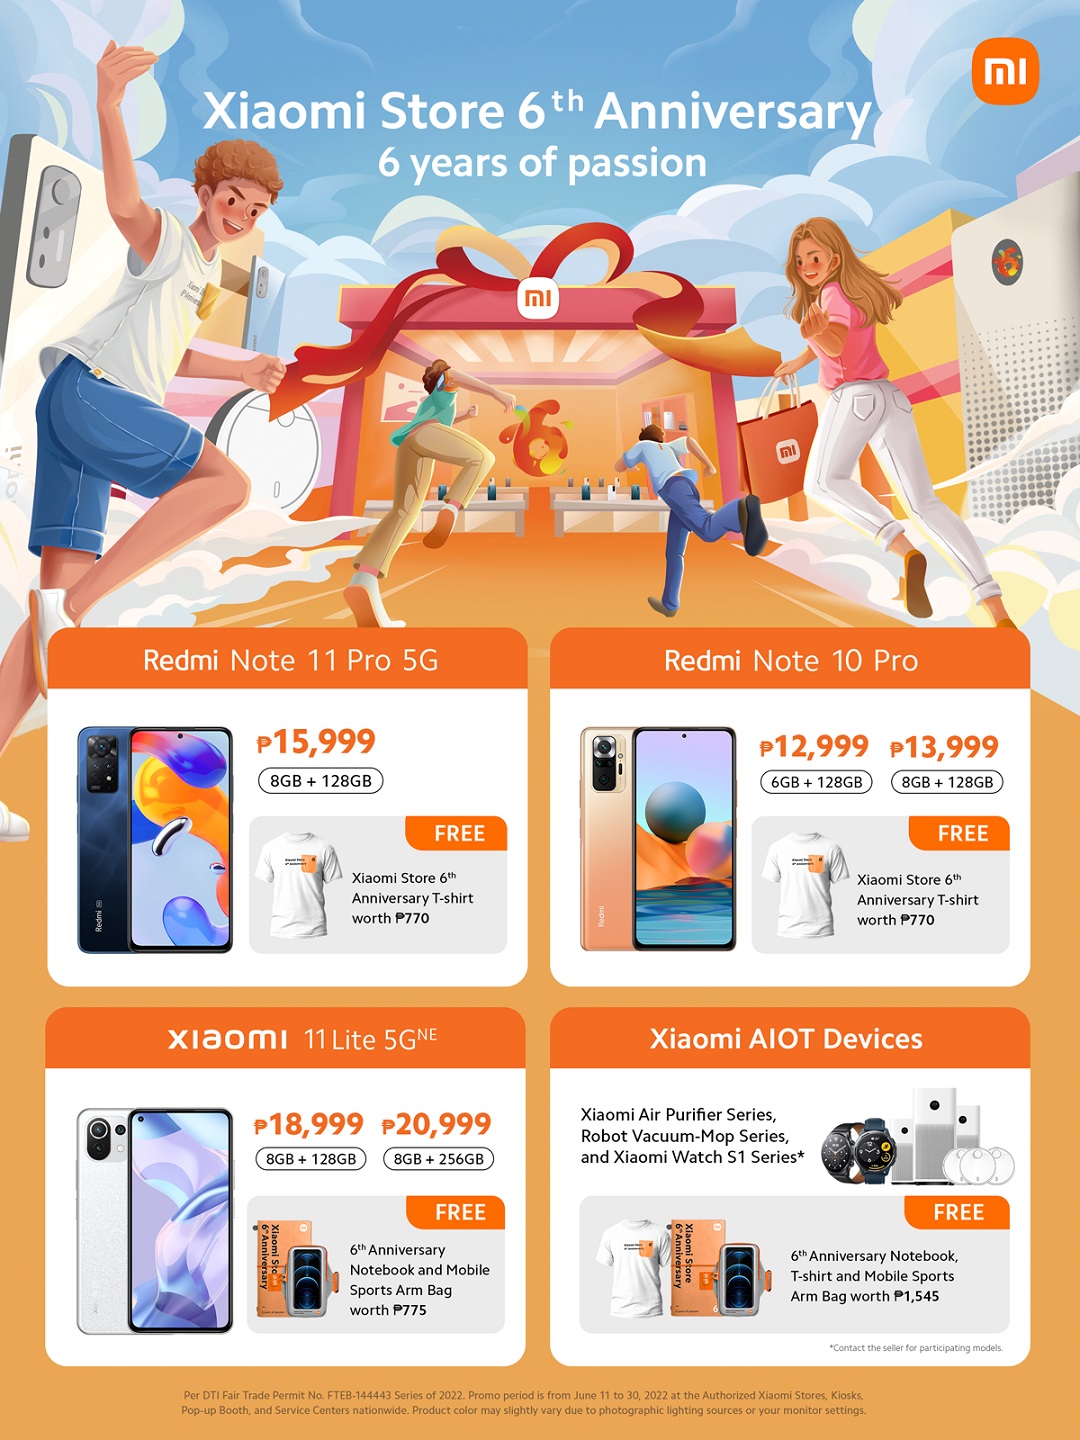 Celebrate Xiaomi’s 6th Anniversary in Retail with Amazing Deals!